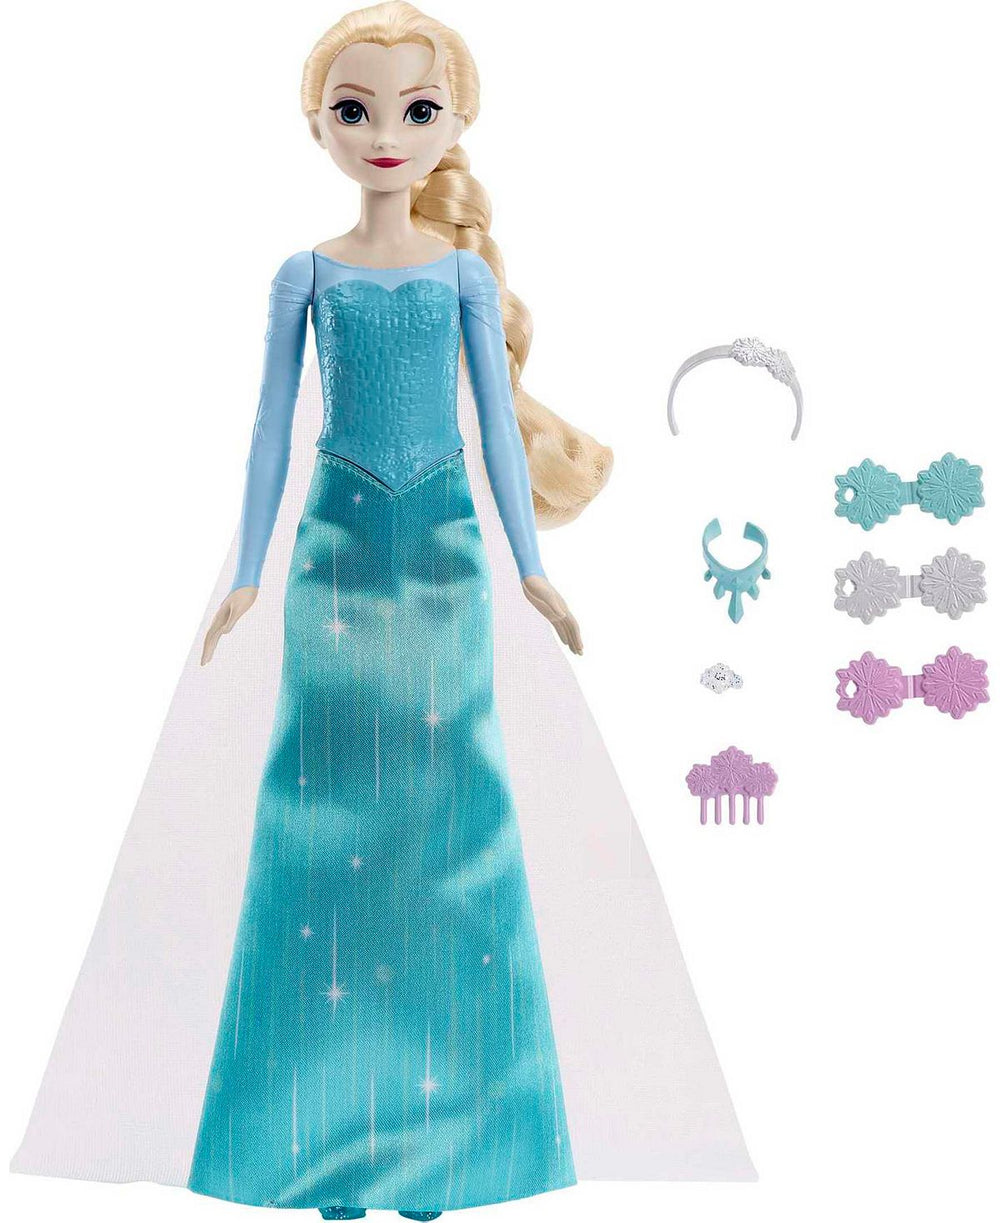 Disney Princess Frozen - Getting Ready Elsa Fashion Doll with Accessories